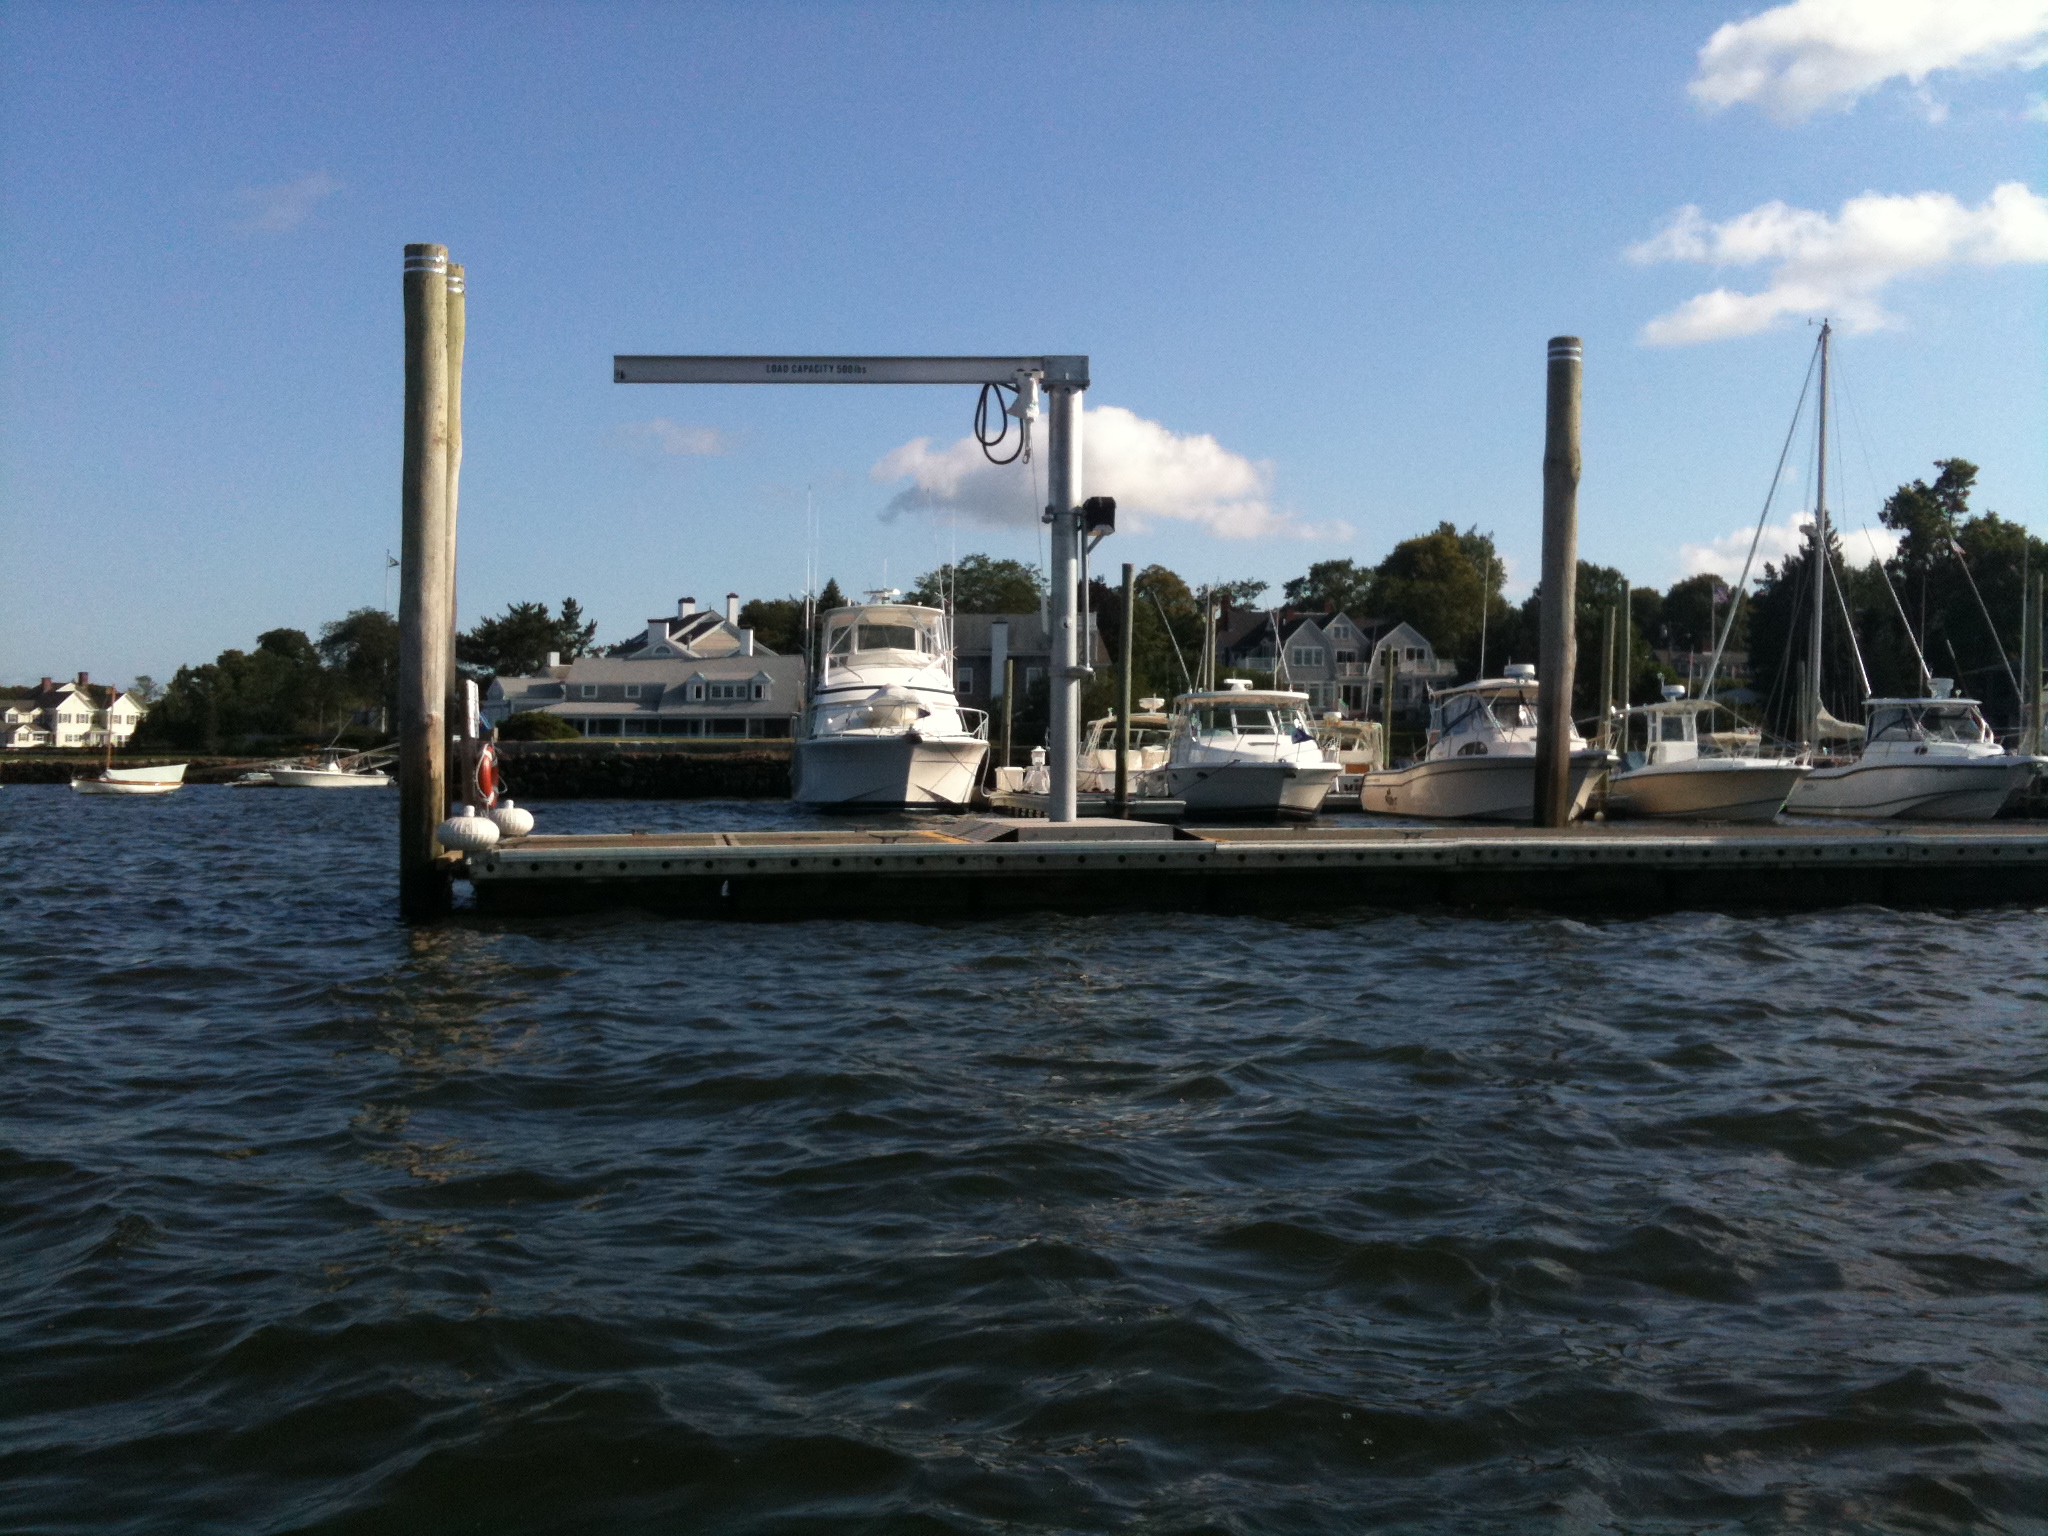 Davit for dock to boat access